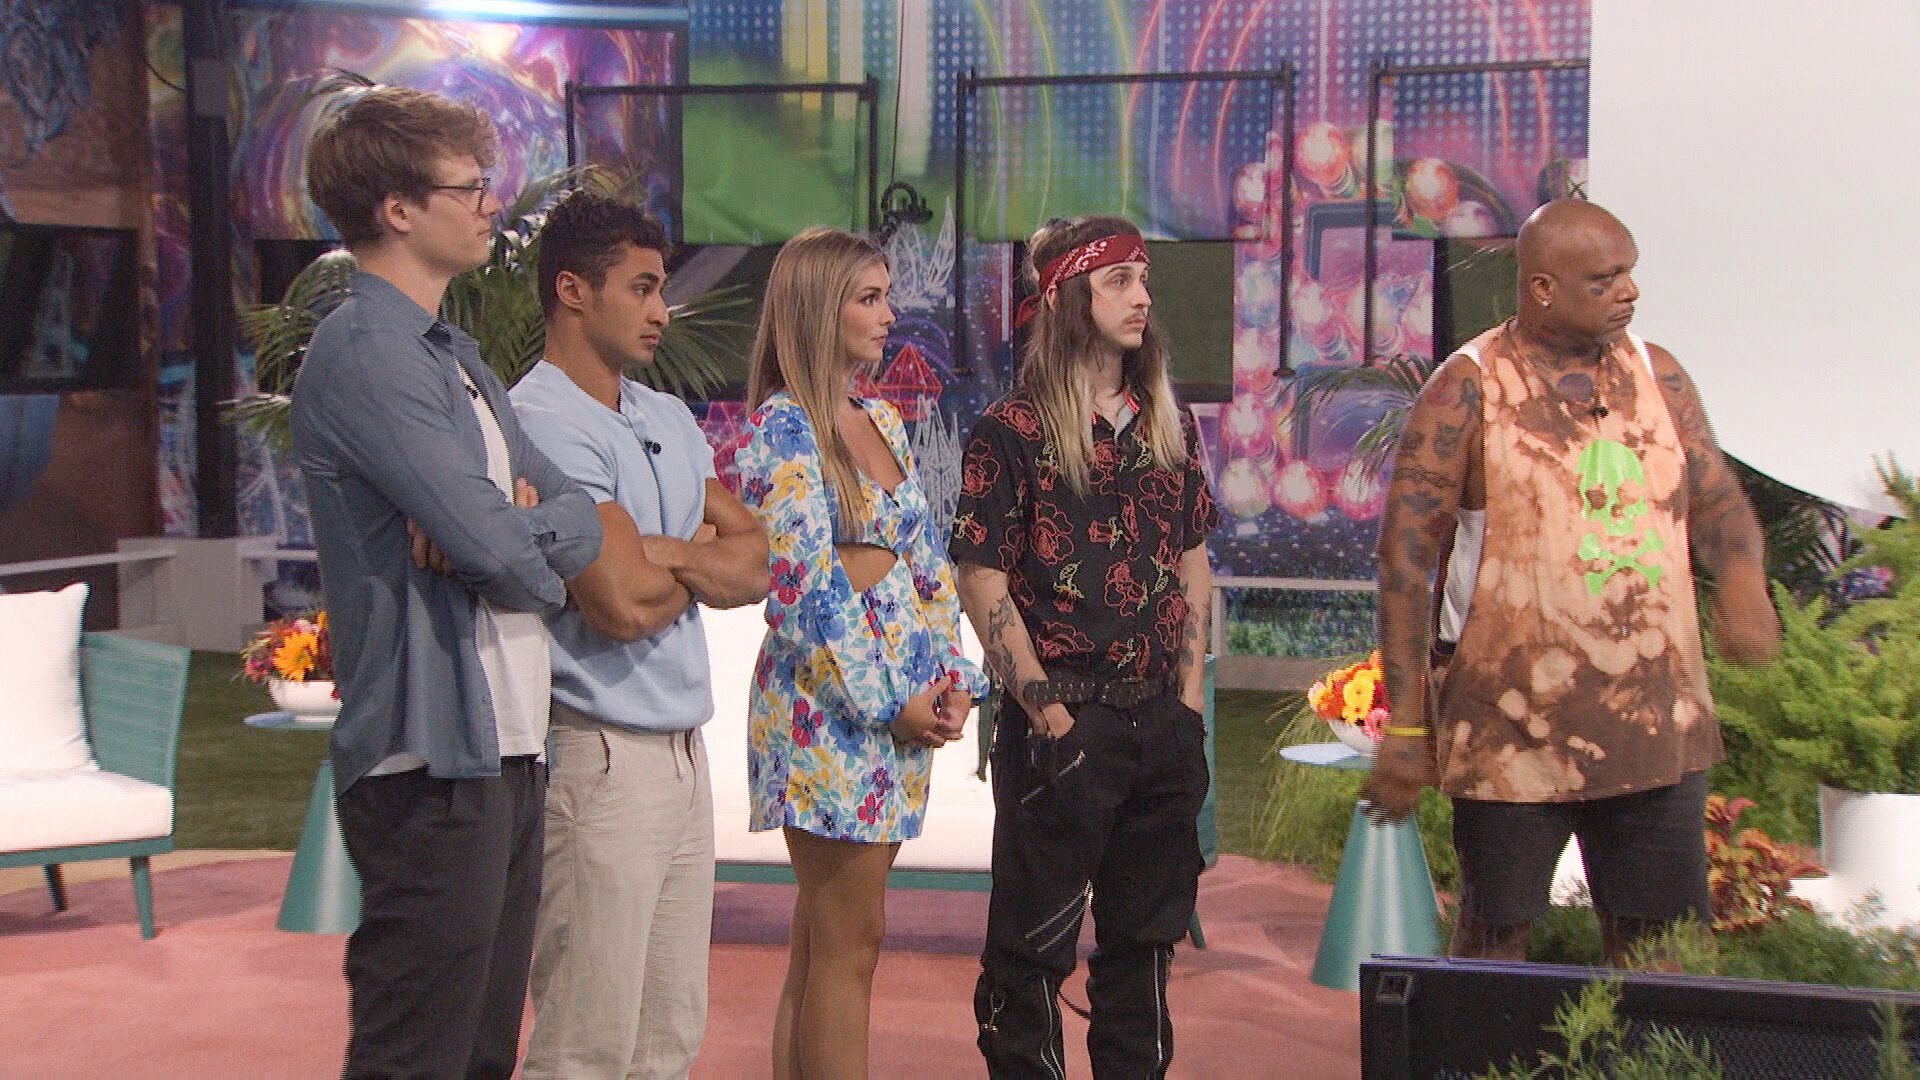 Kyle Capener, Joseph Abdin, Alyssa Snider, Matthew Turner and Terrance Higgins standing next to each other during 'Big Brother 24'